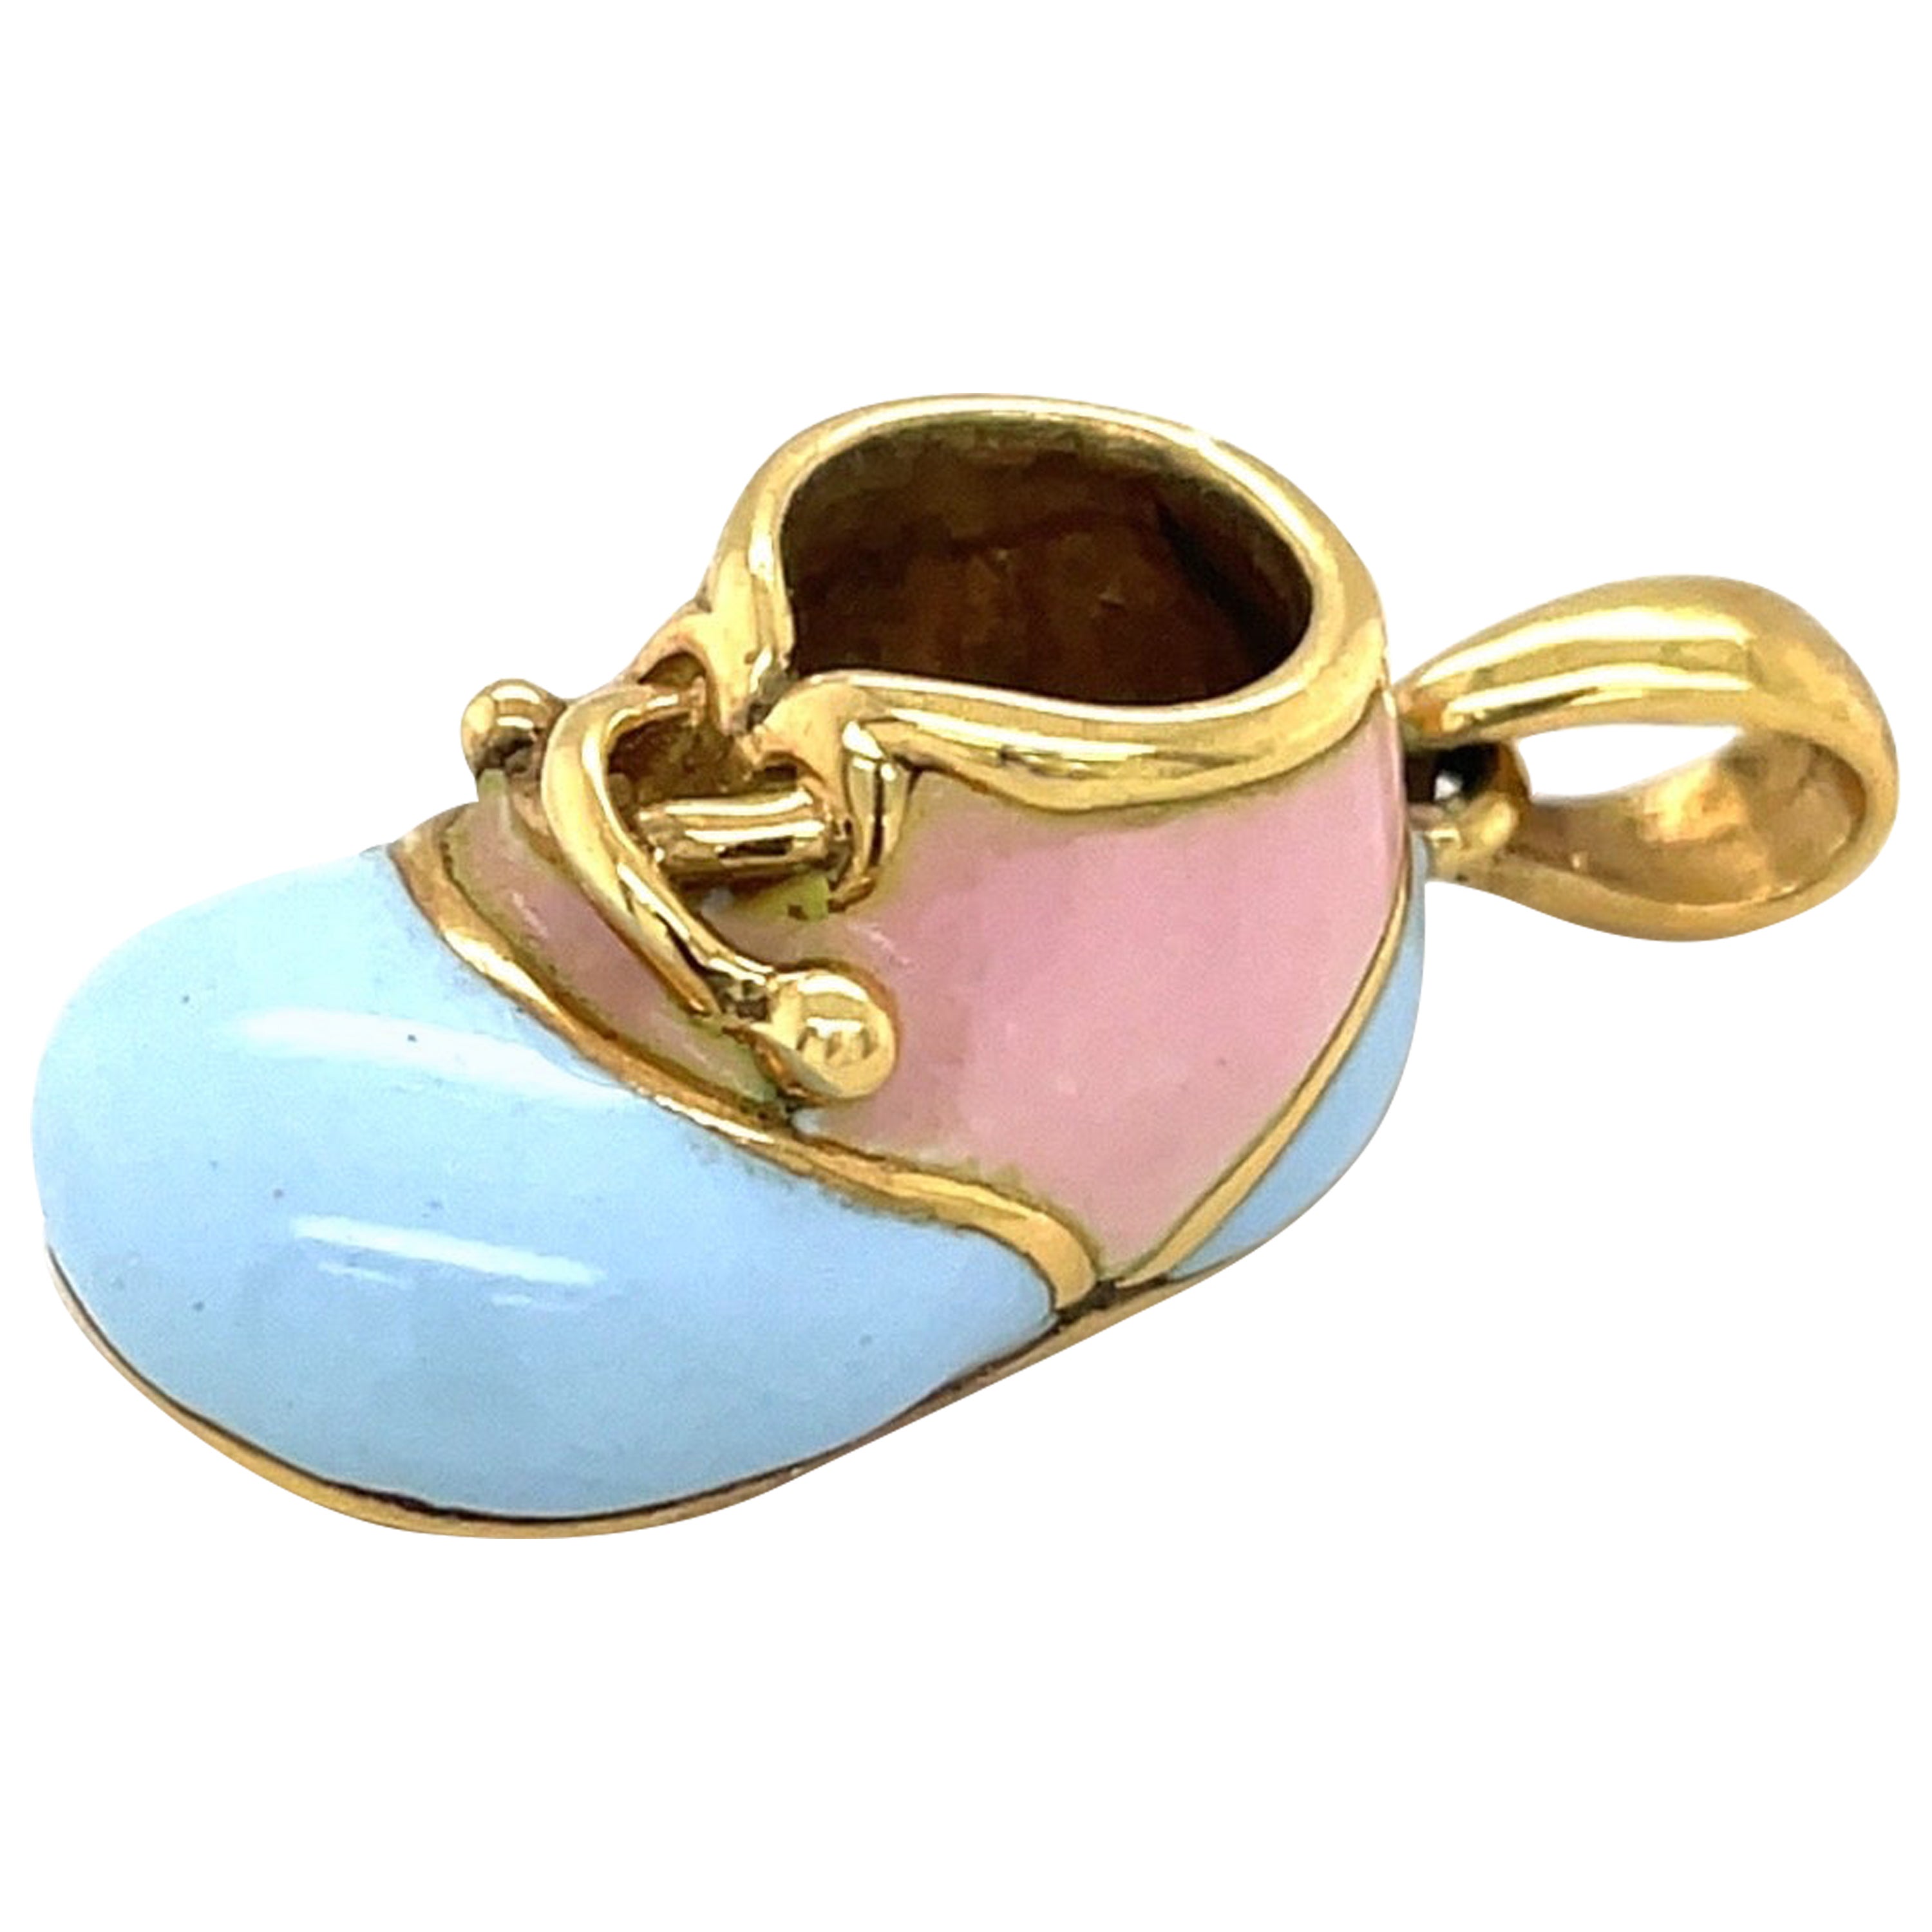 Cellini 18KT Baby Shoe with Pink and Light Blue Enamel For Sale